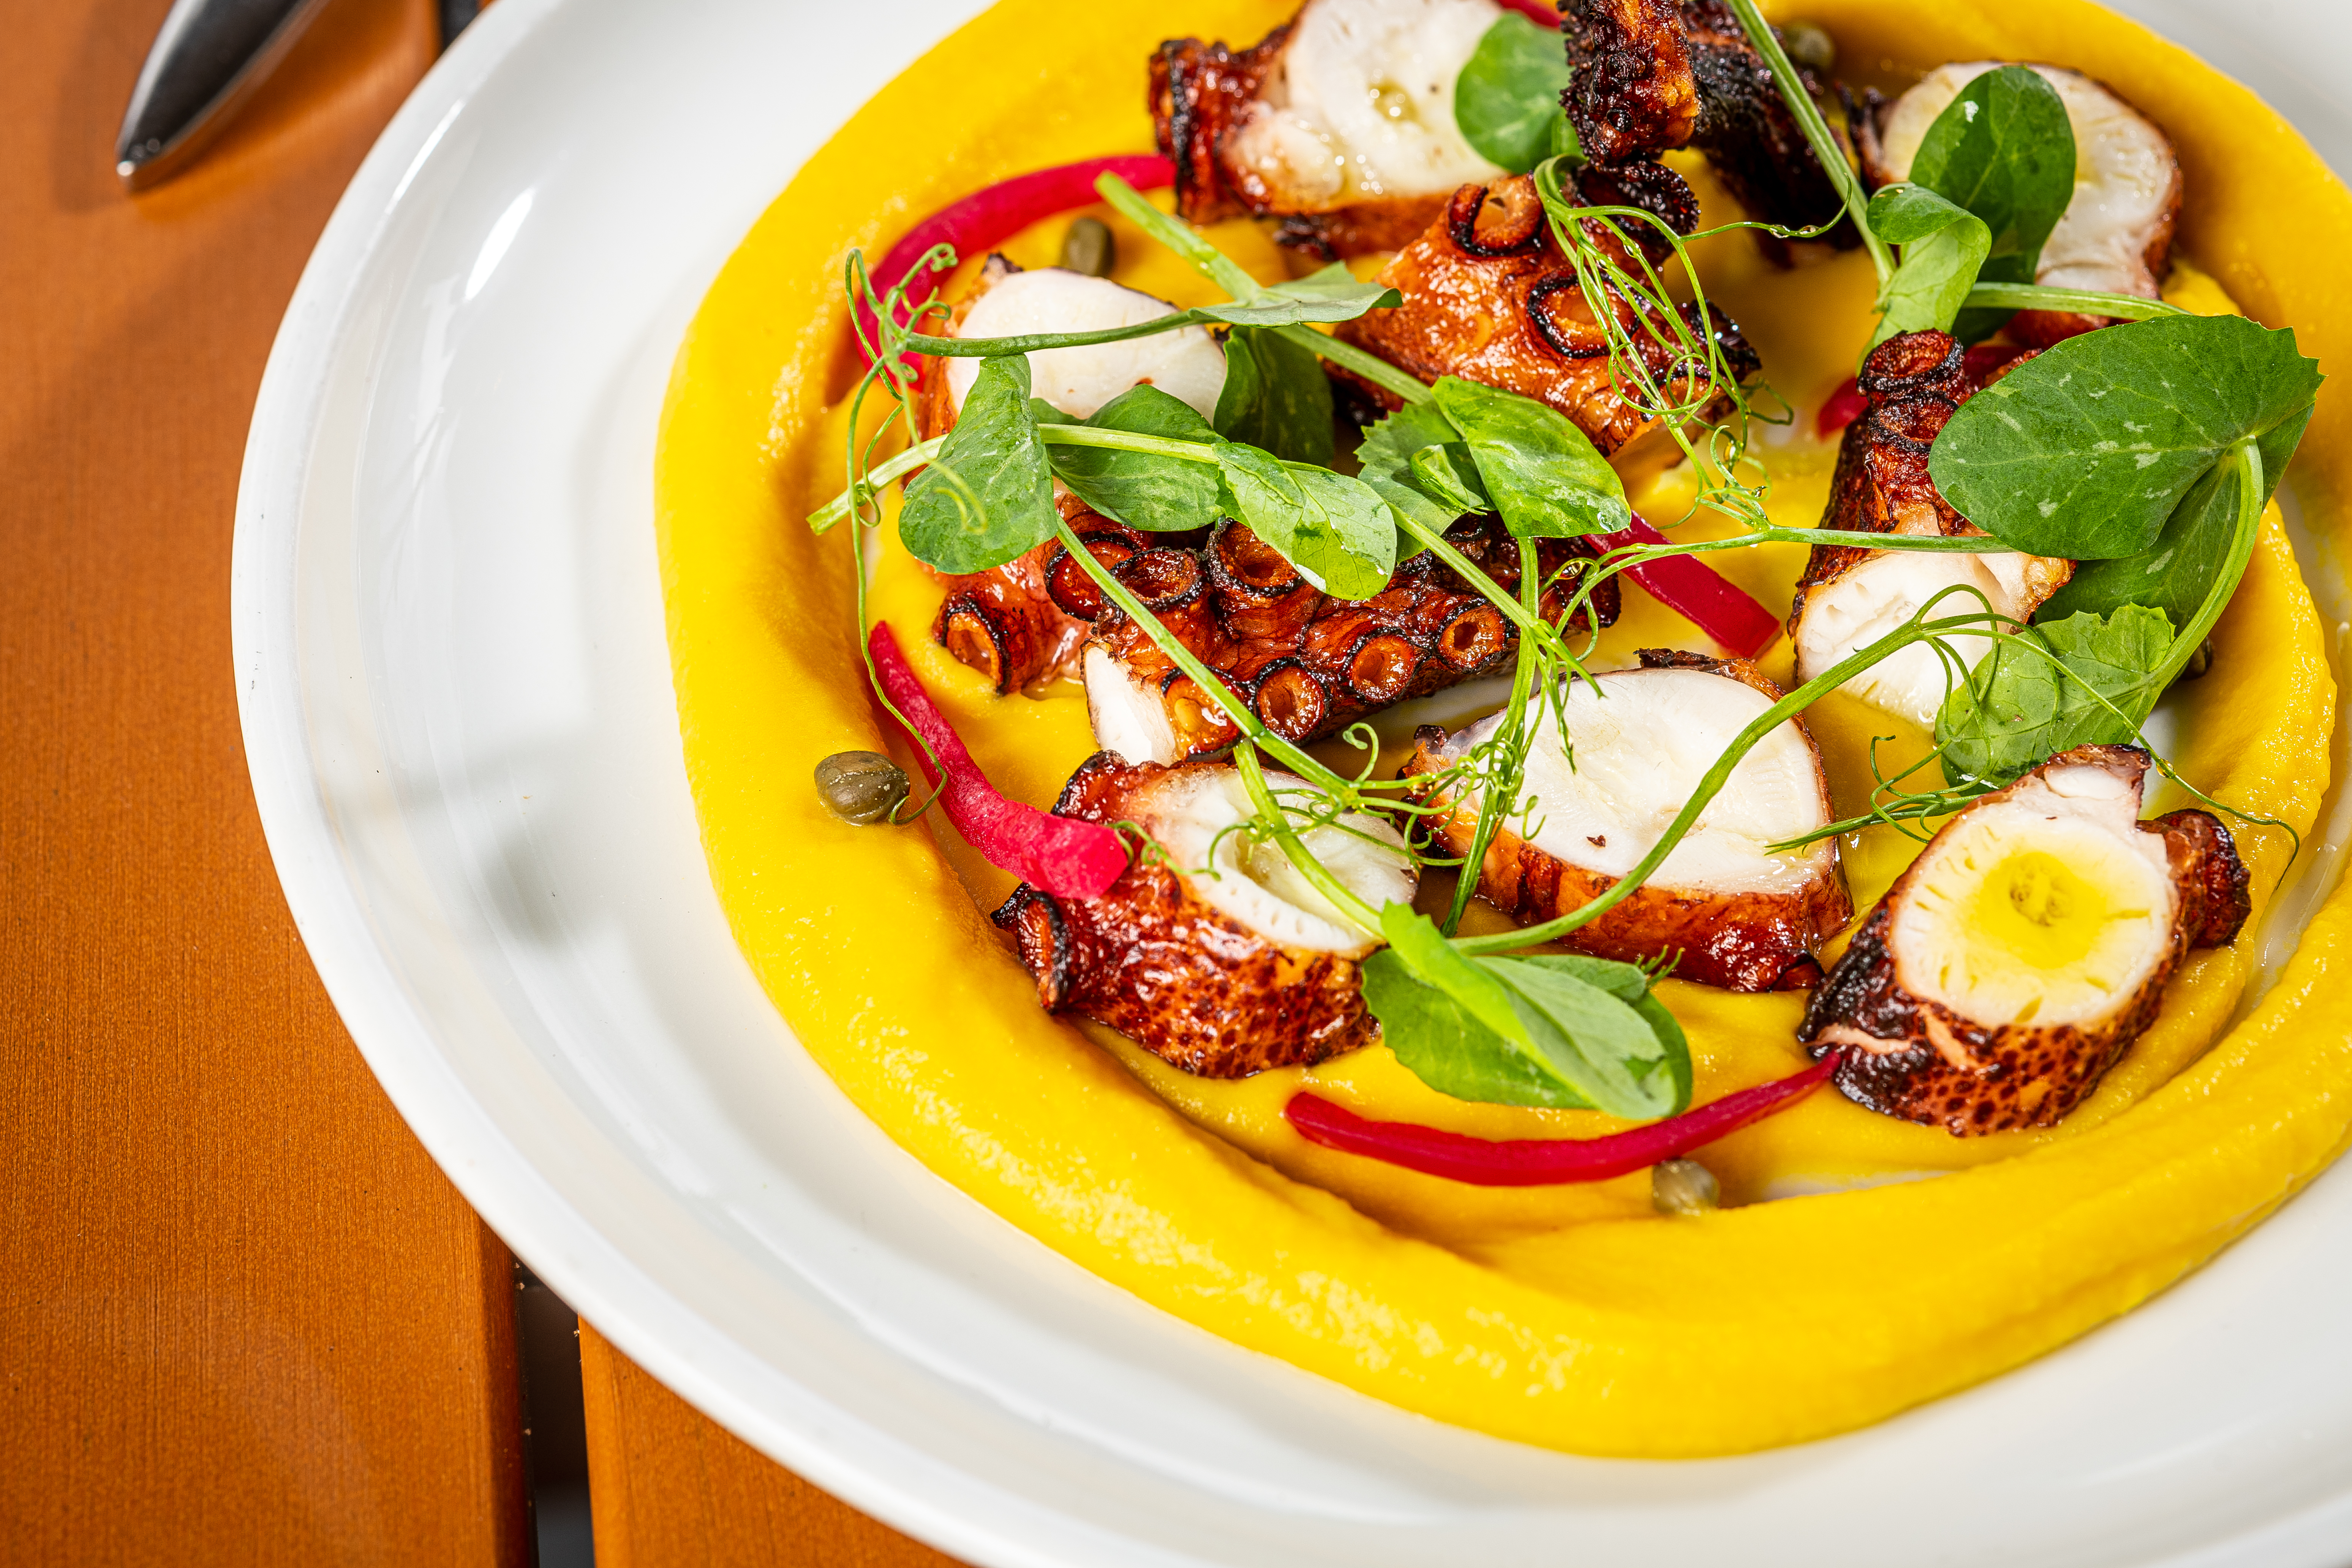 Slices of octopus are scattered in a vibrant yellow sauce with greens.